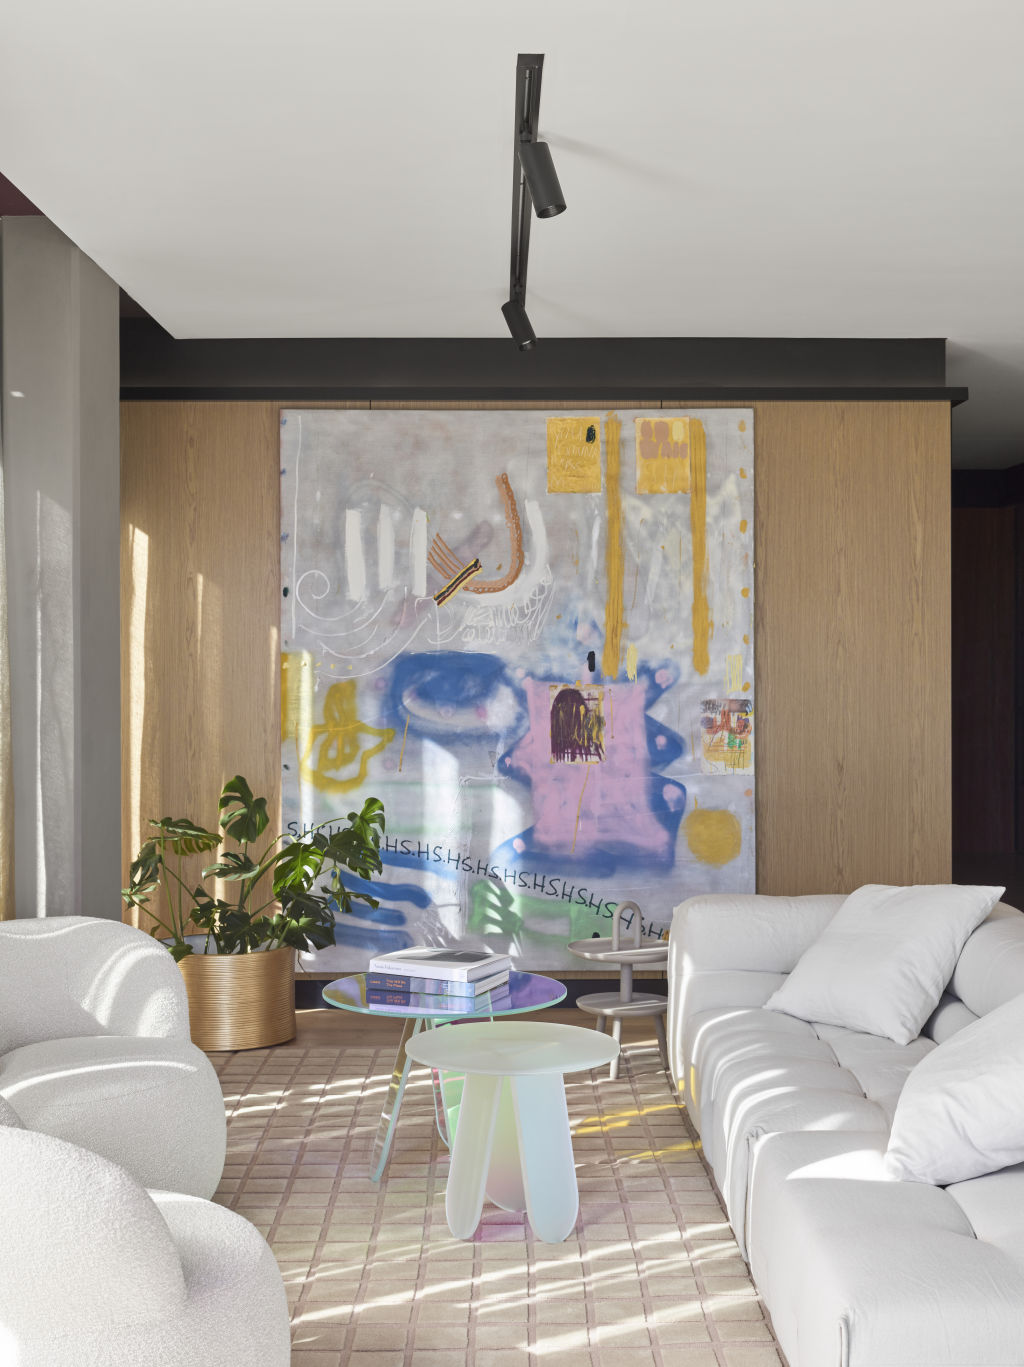 Architects Joel Alcorn and Chloe Middleton have transformed this once uninhabited apartment home into an artist paradise with strikingly beautiful features made to impress Photo: Toby Scott